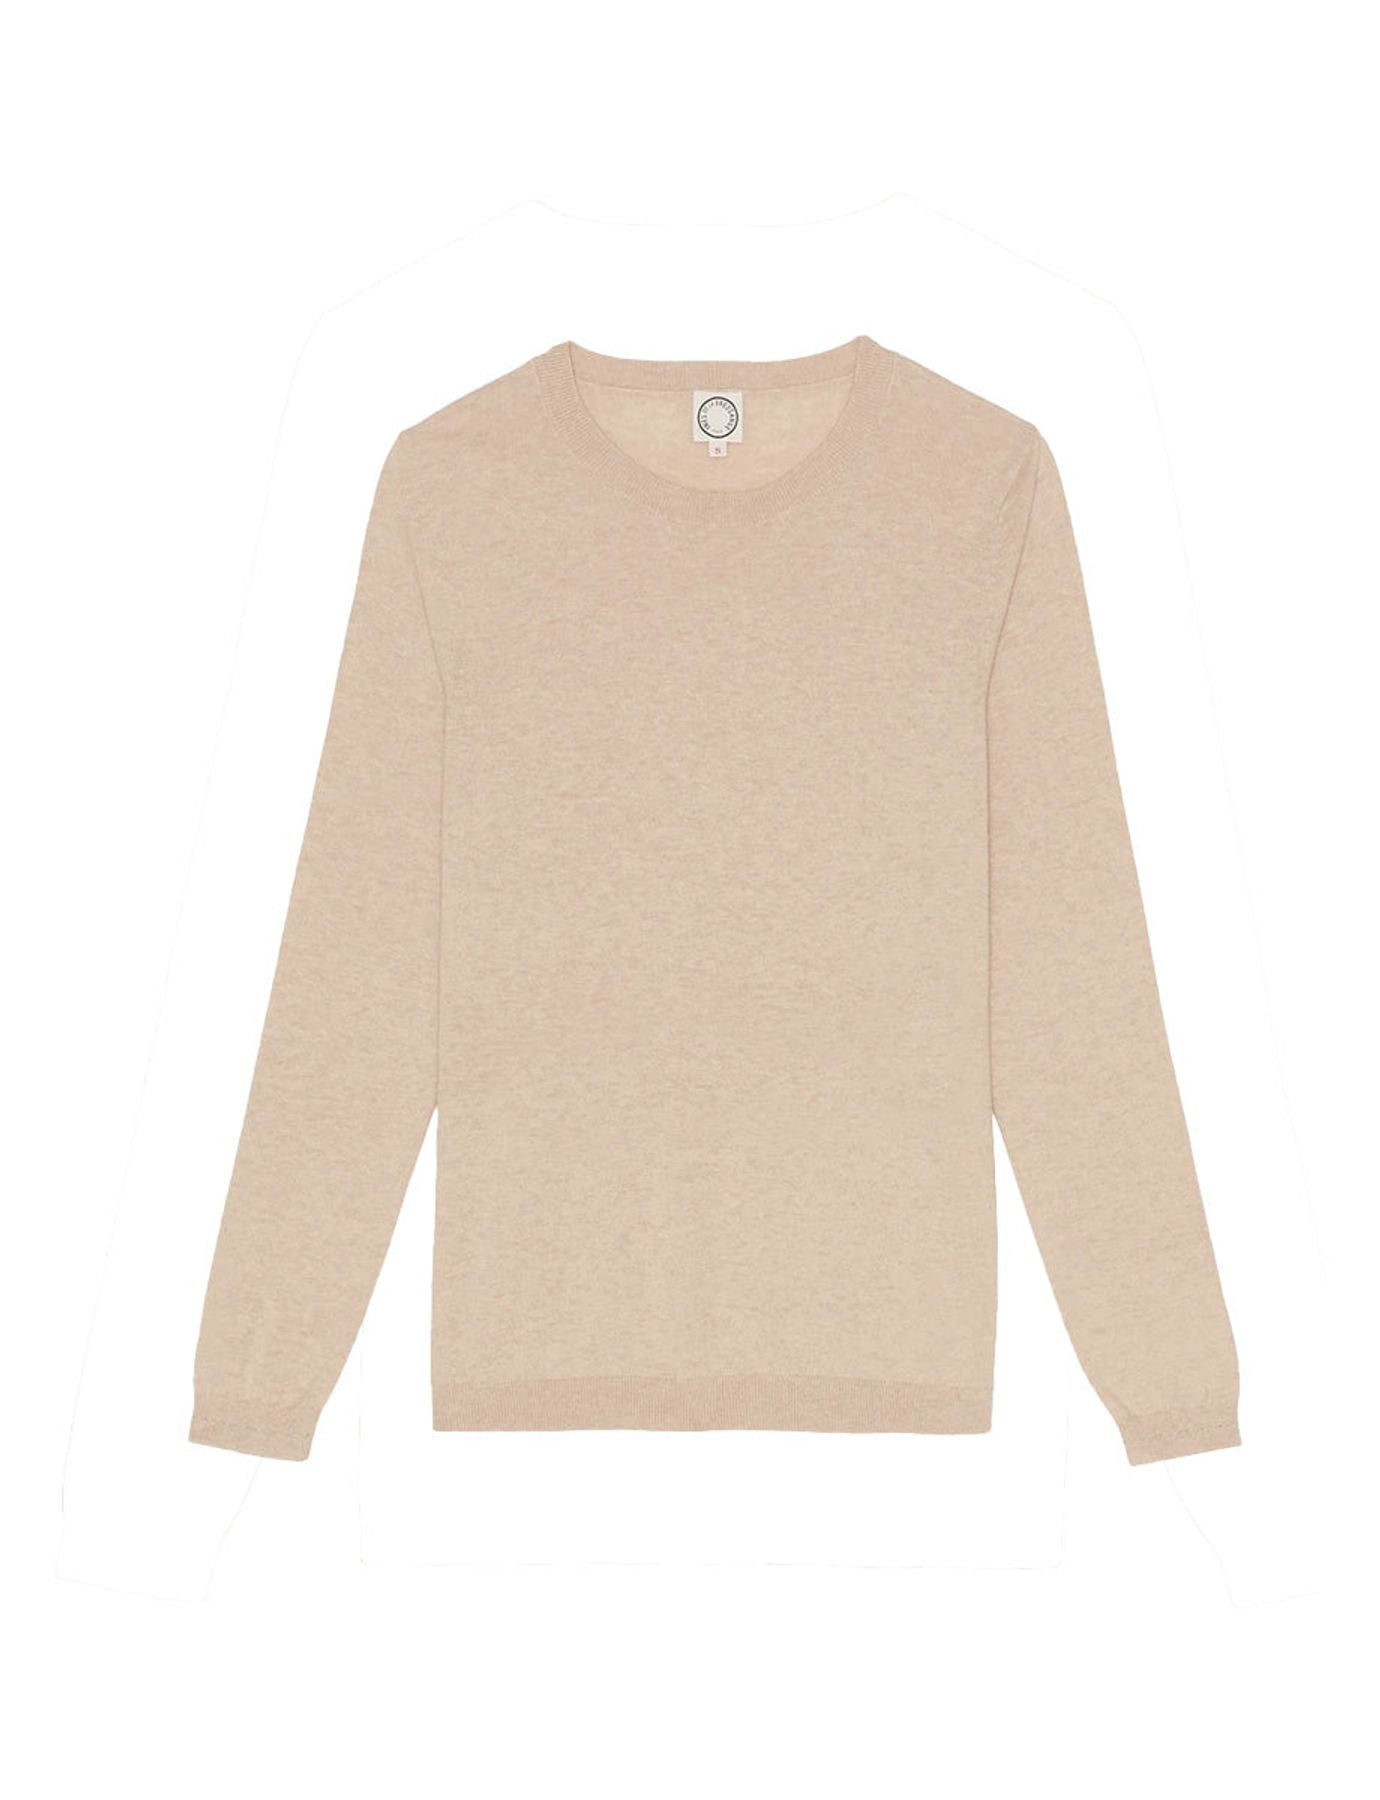 maglione-angelo-beige